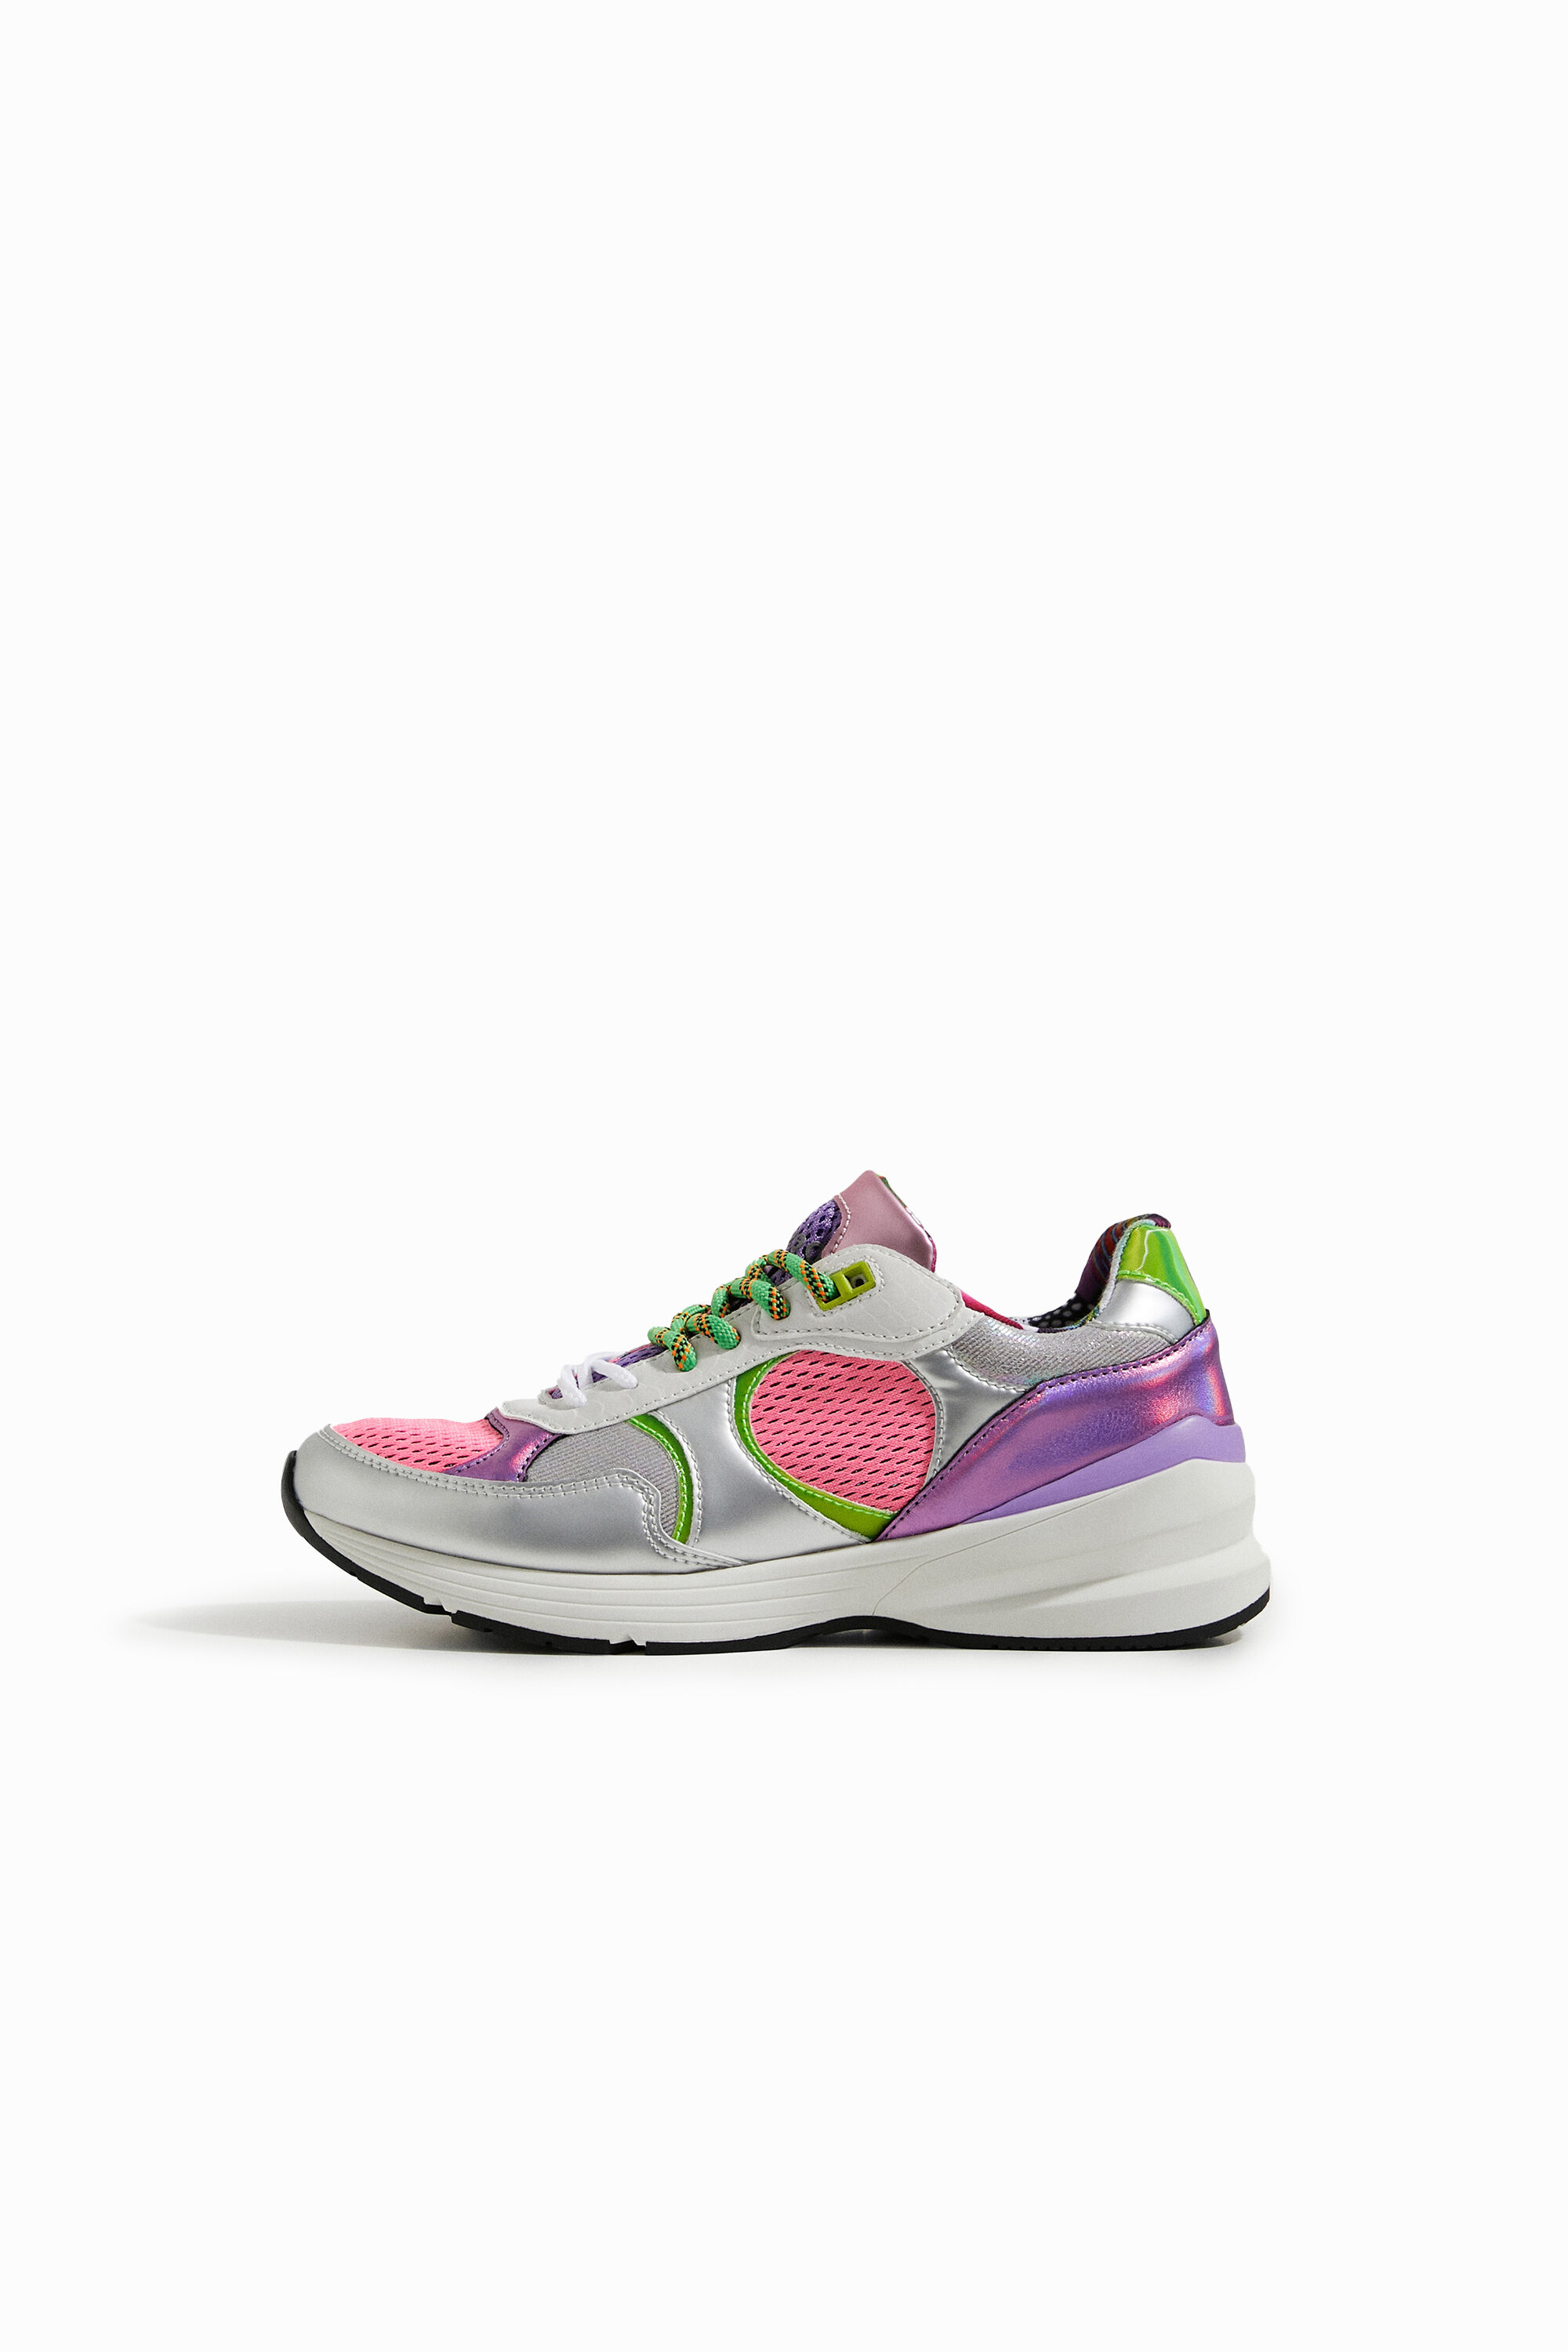 Desigual M. Christian Lacroix Neon Sneakers In Material Finishes